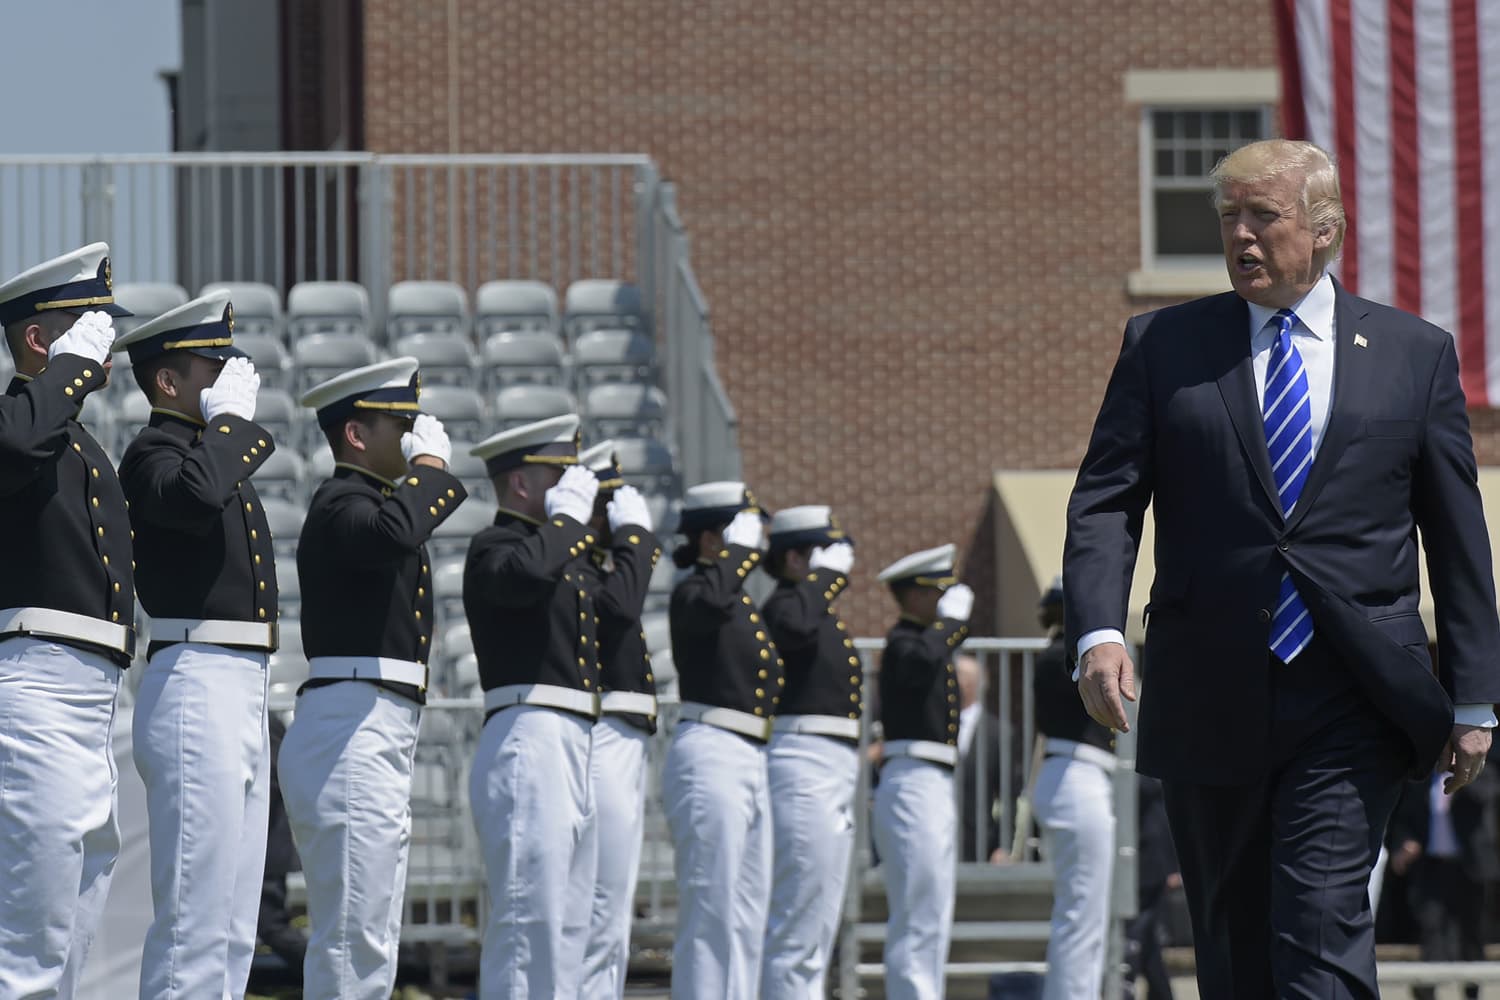 President Donald Trump arrives to give the commencement address at the U.S. Coast Guard Academy in New London, Conn. (Susan Walsh/AP)